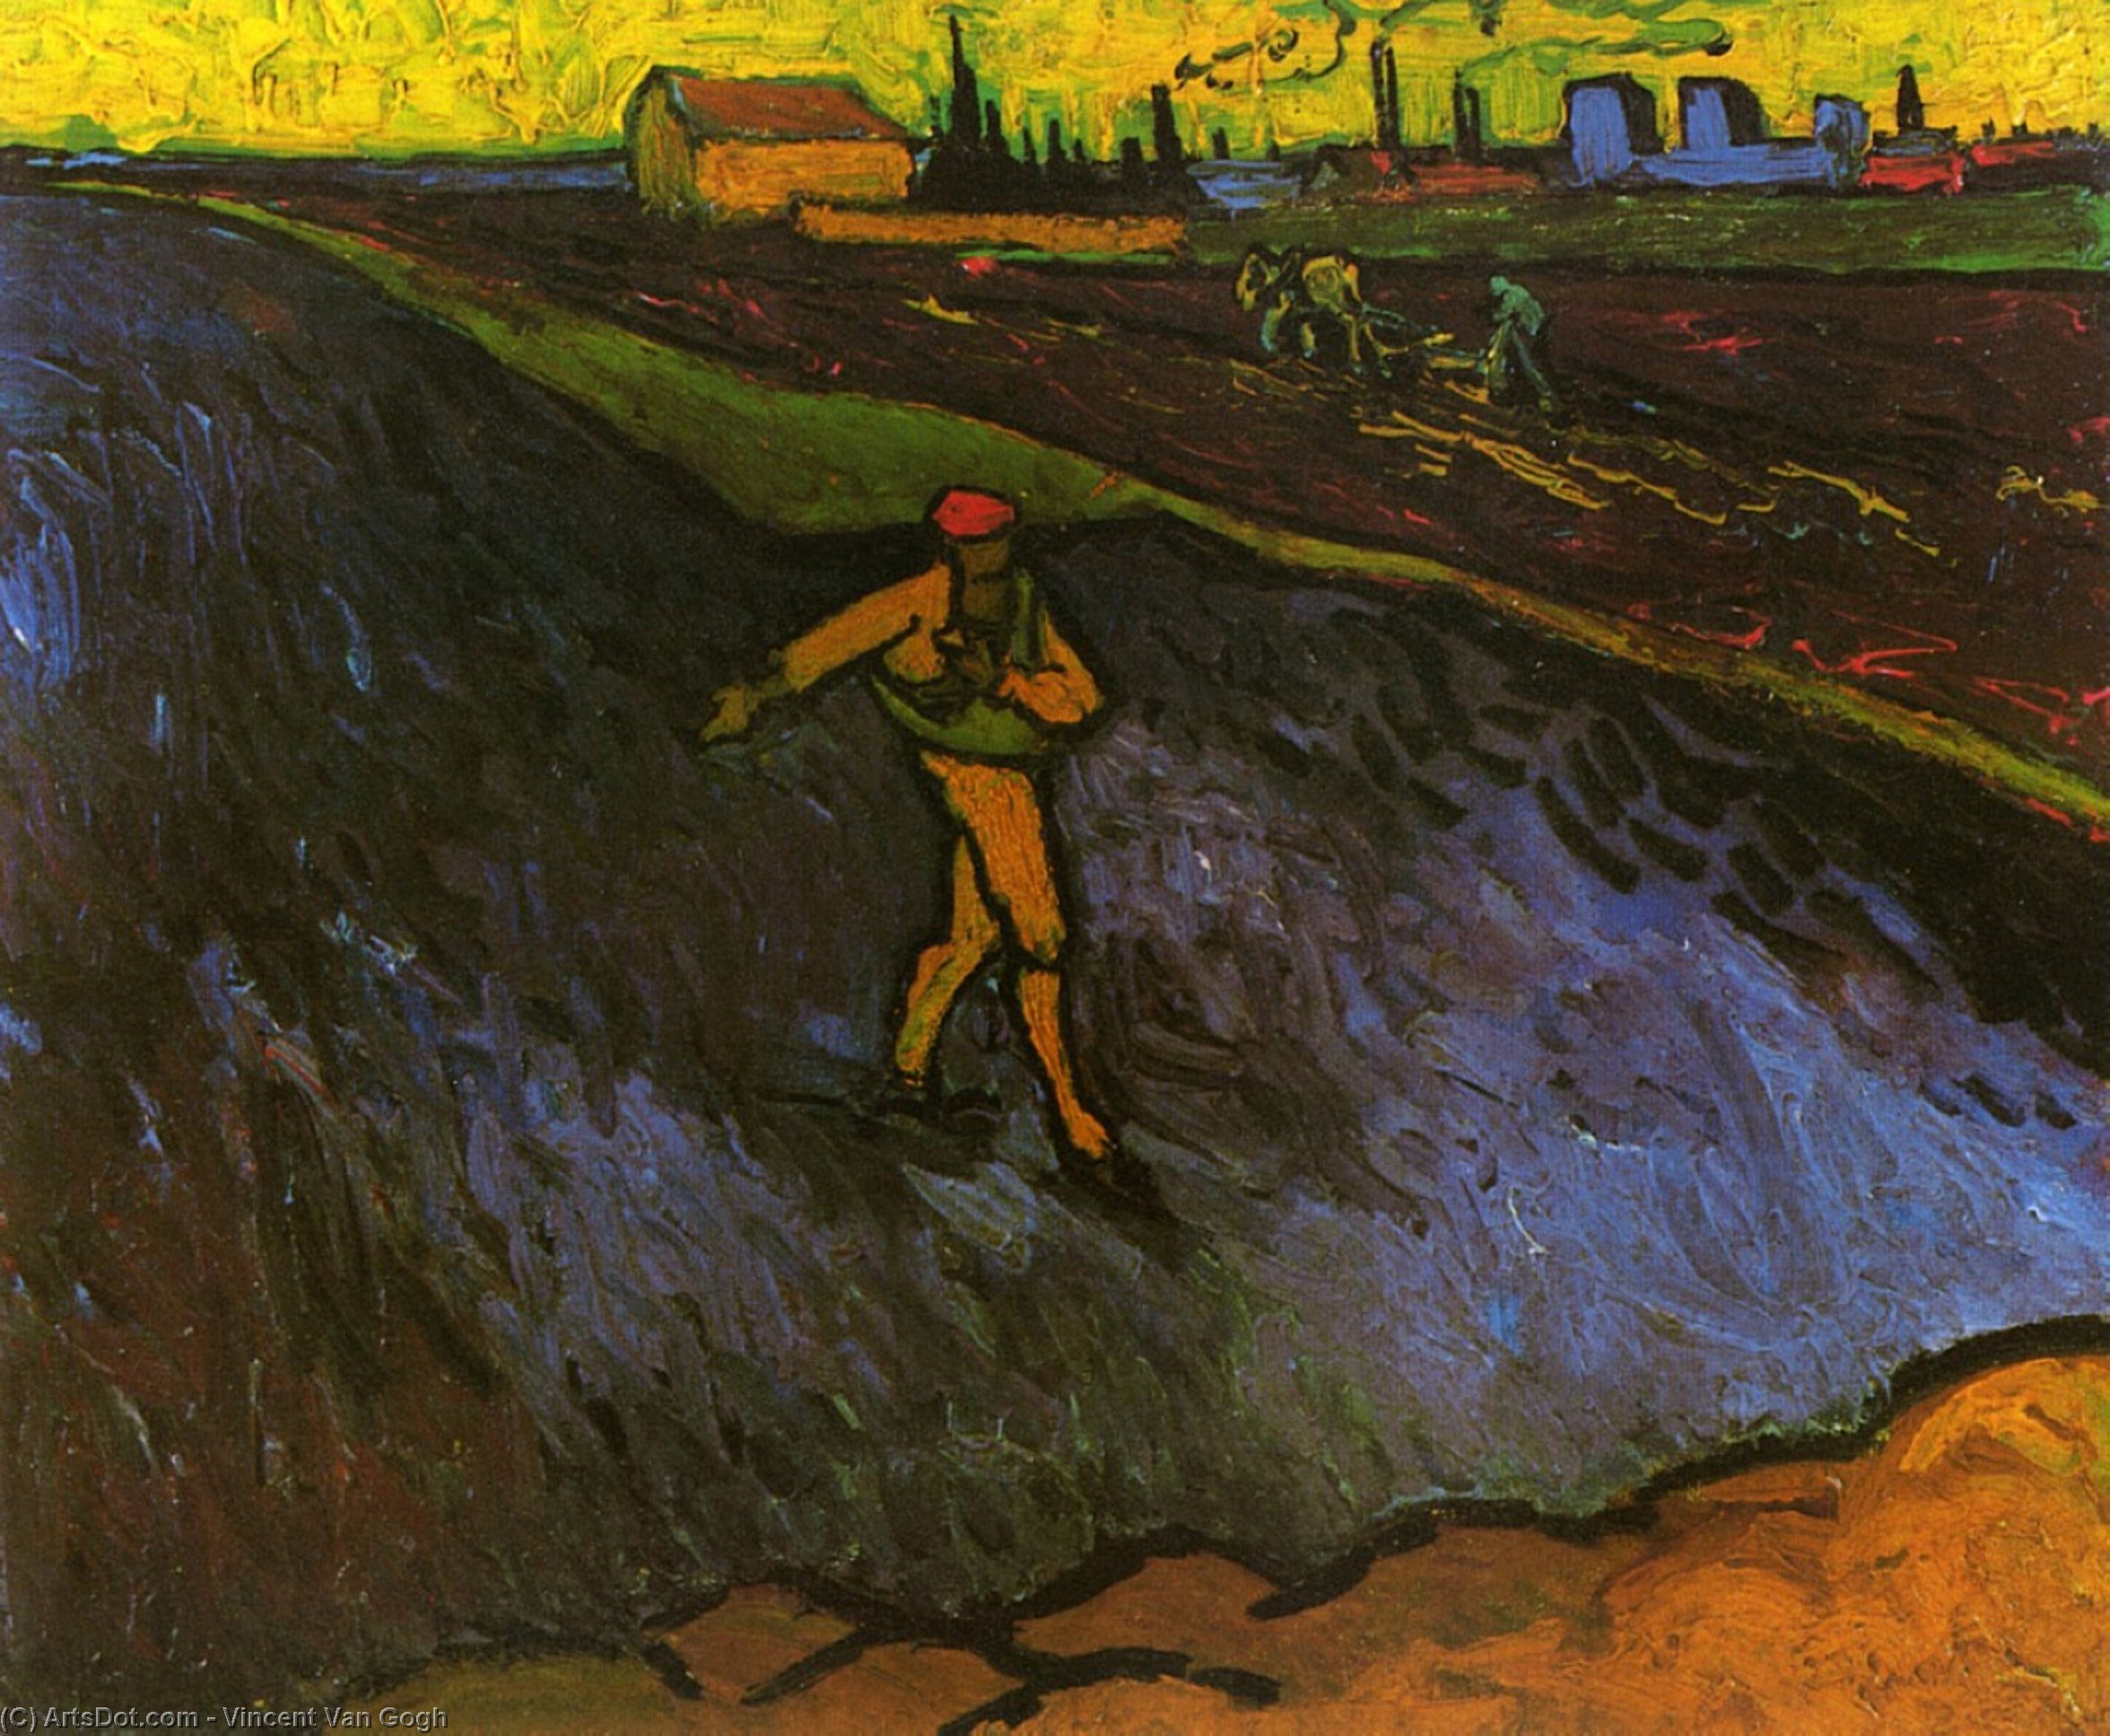 Wikioo.org - Encyklopedia Sztuk Pięknych - Malarstwo, Grafika Vincent Van Gogh - The Sower: Outskirts of Arles in the Background